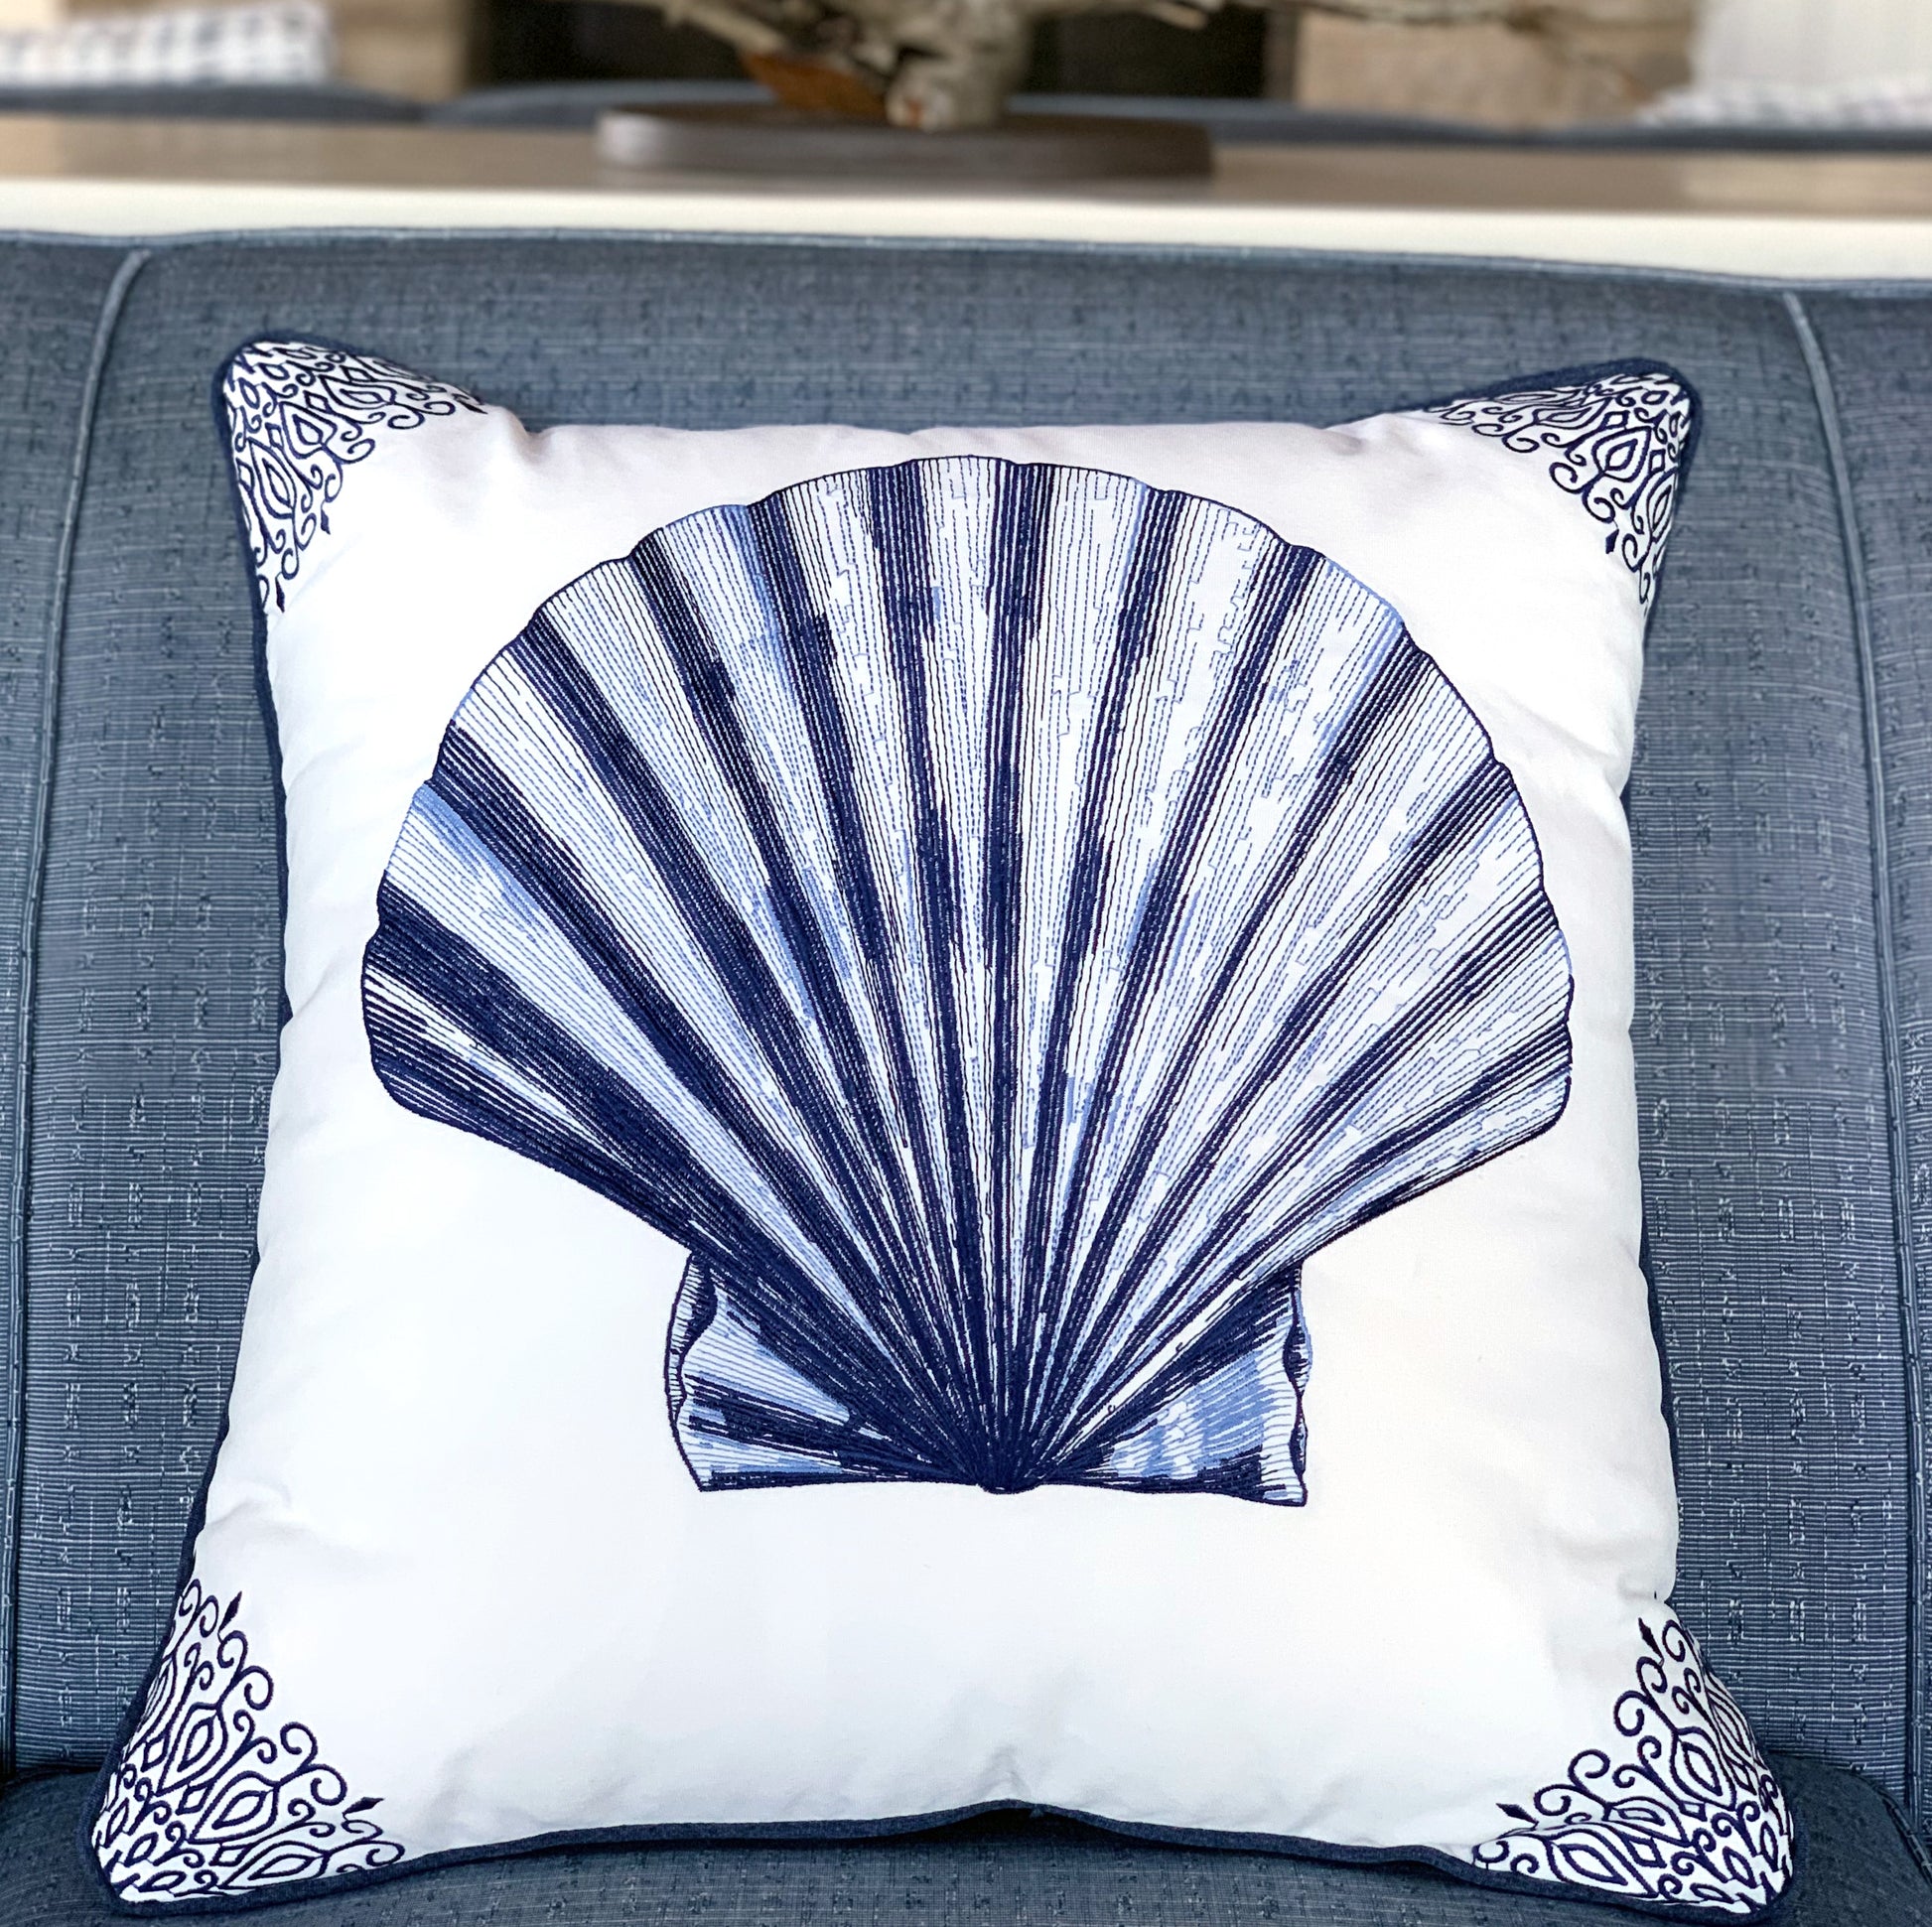 Indigo Scallop Shell pillow styled on a blue sofa.